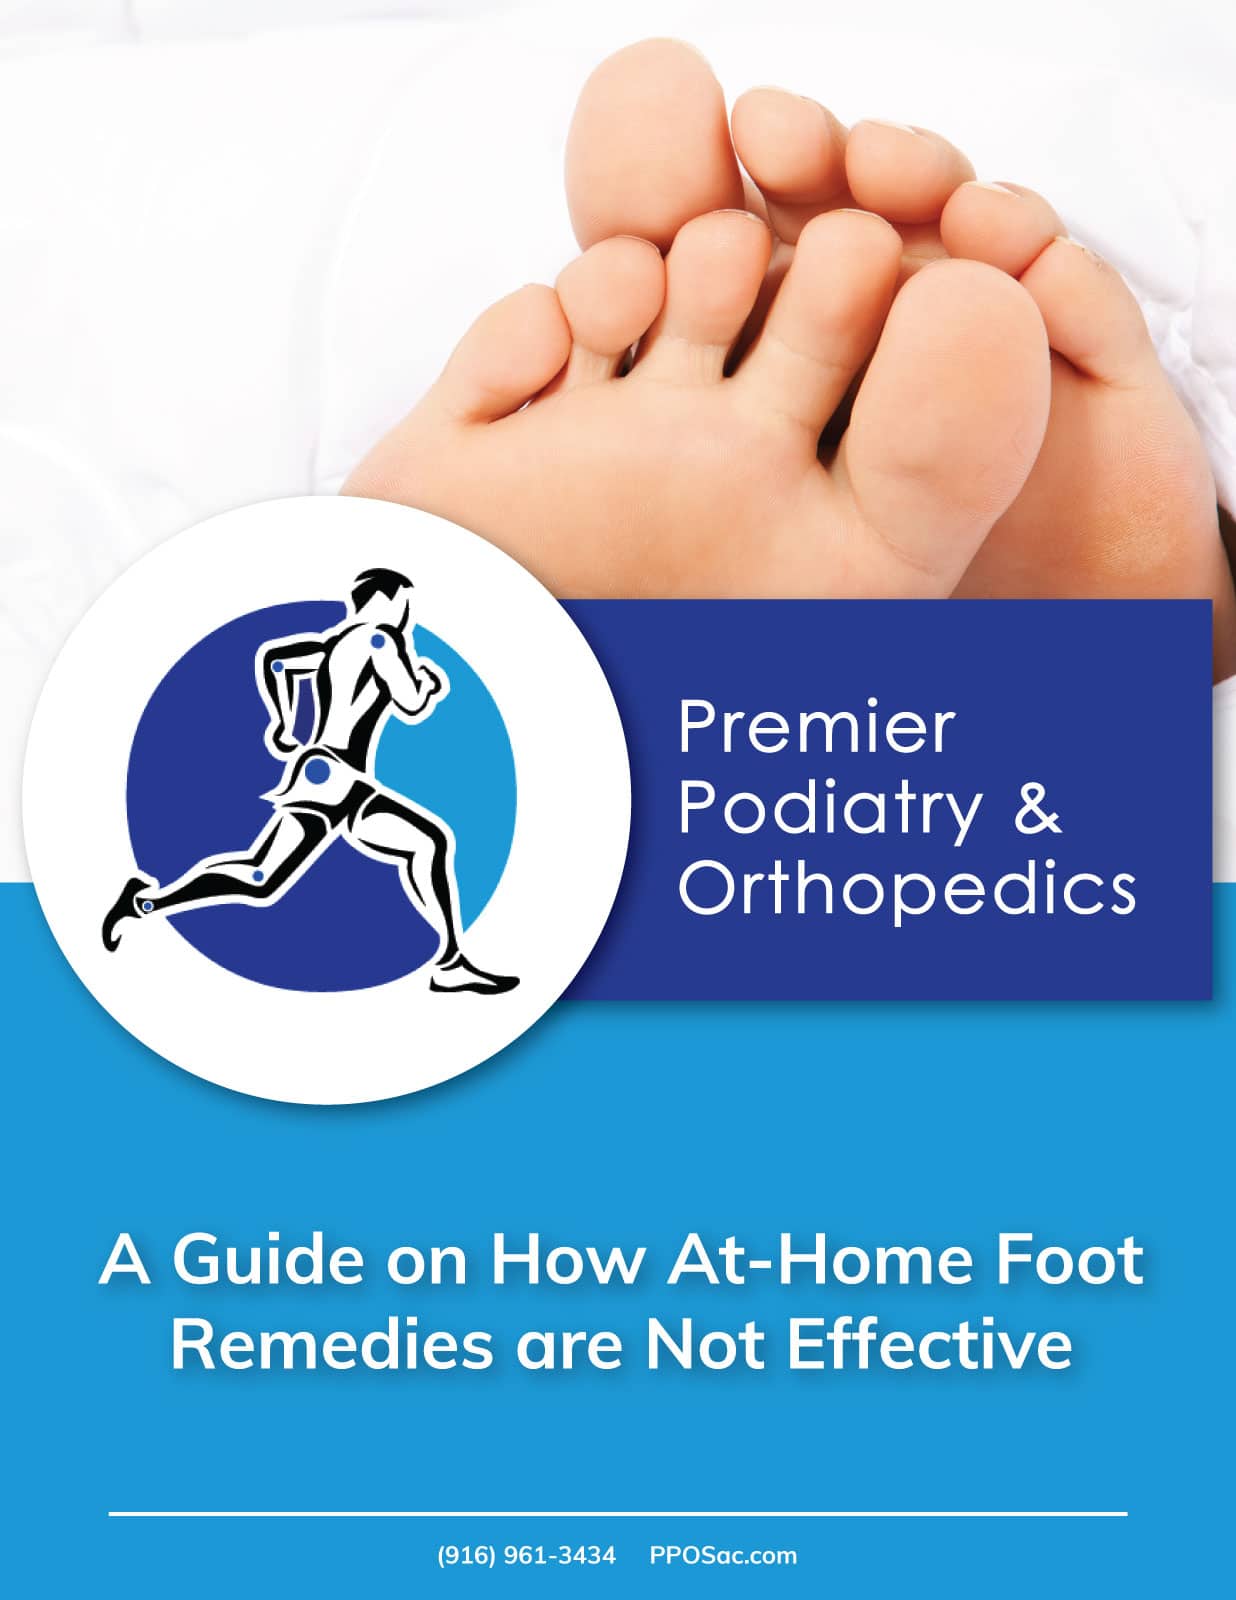 Download Our E-Book “A Guide on How At-Home Foot Remedies are Not Effective”